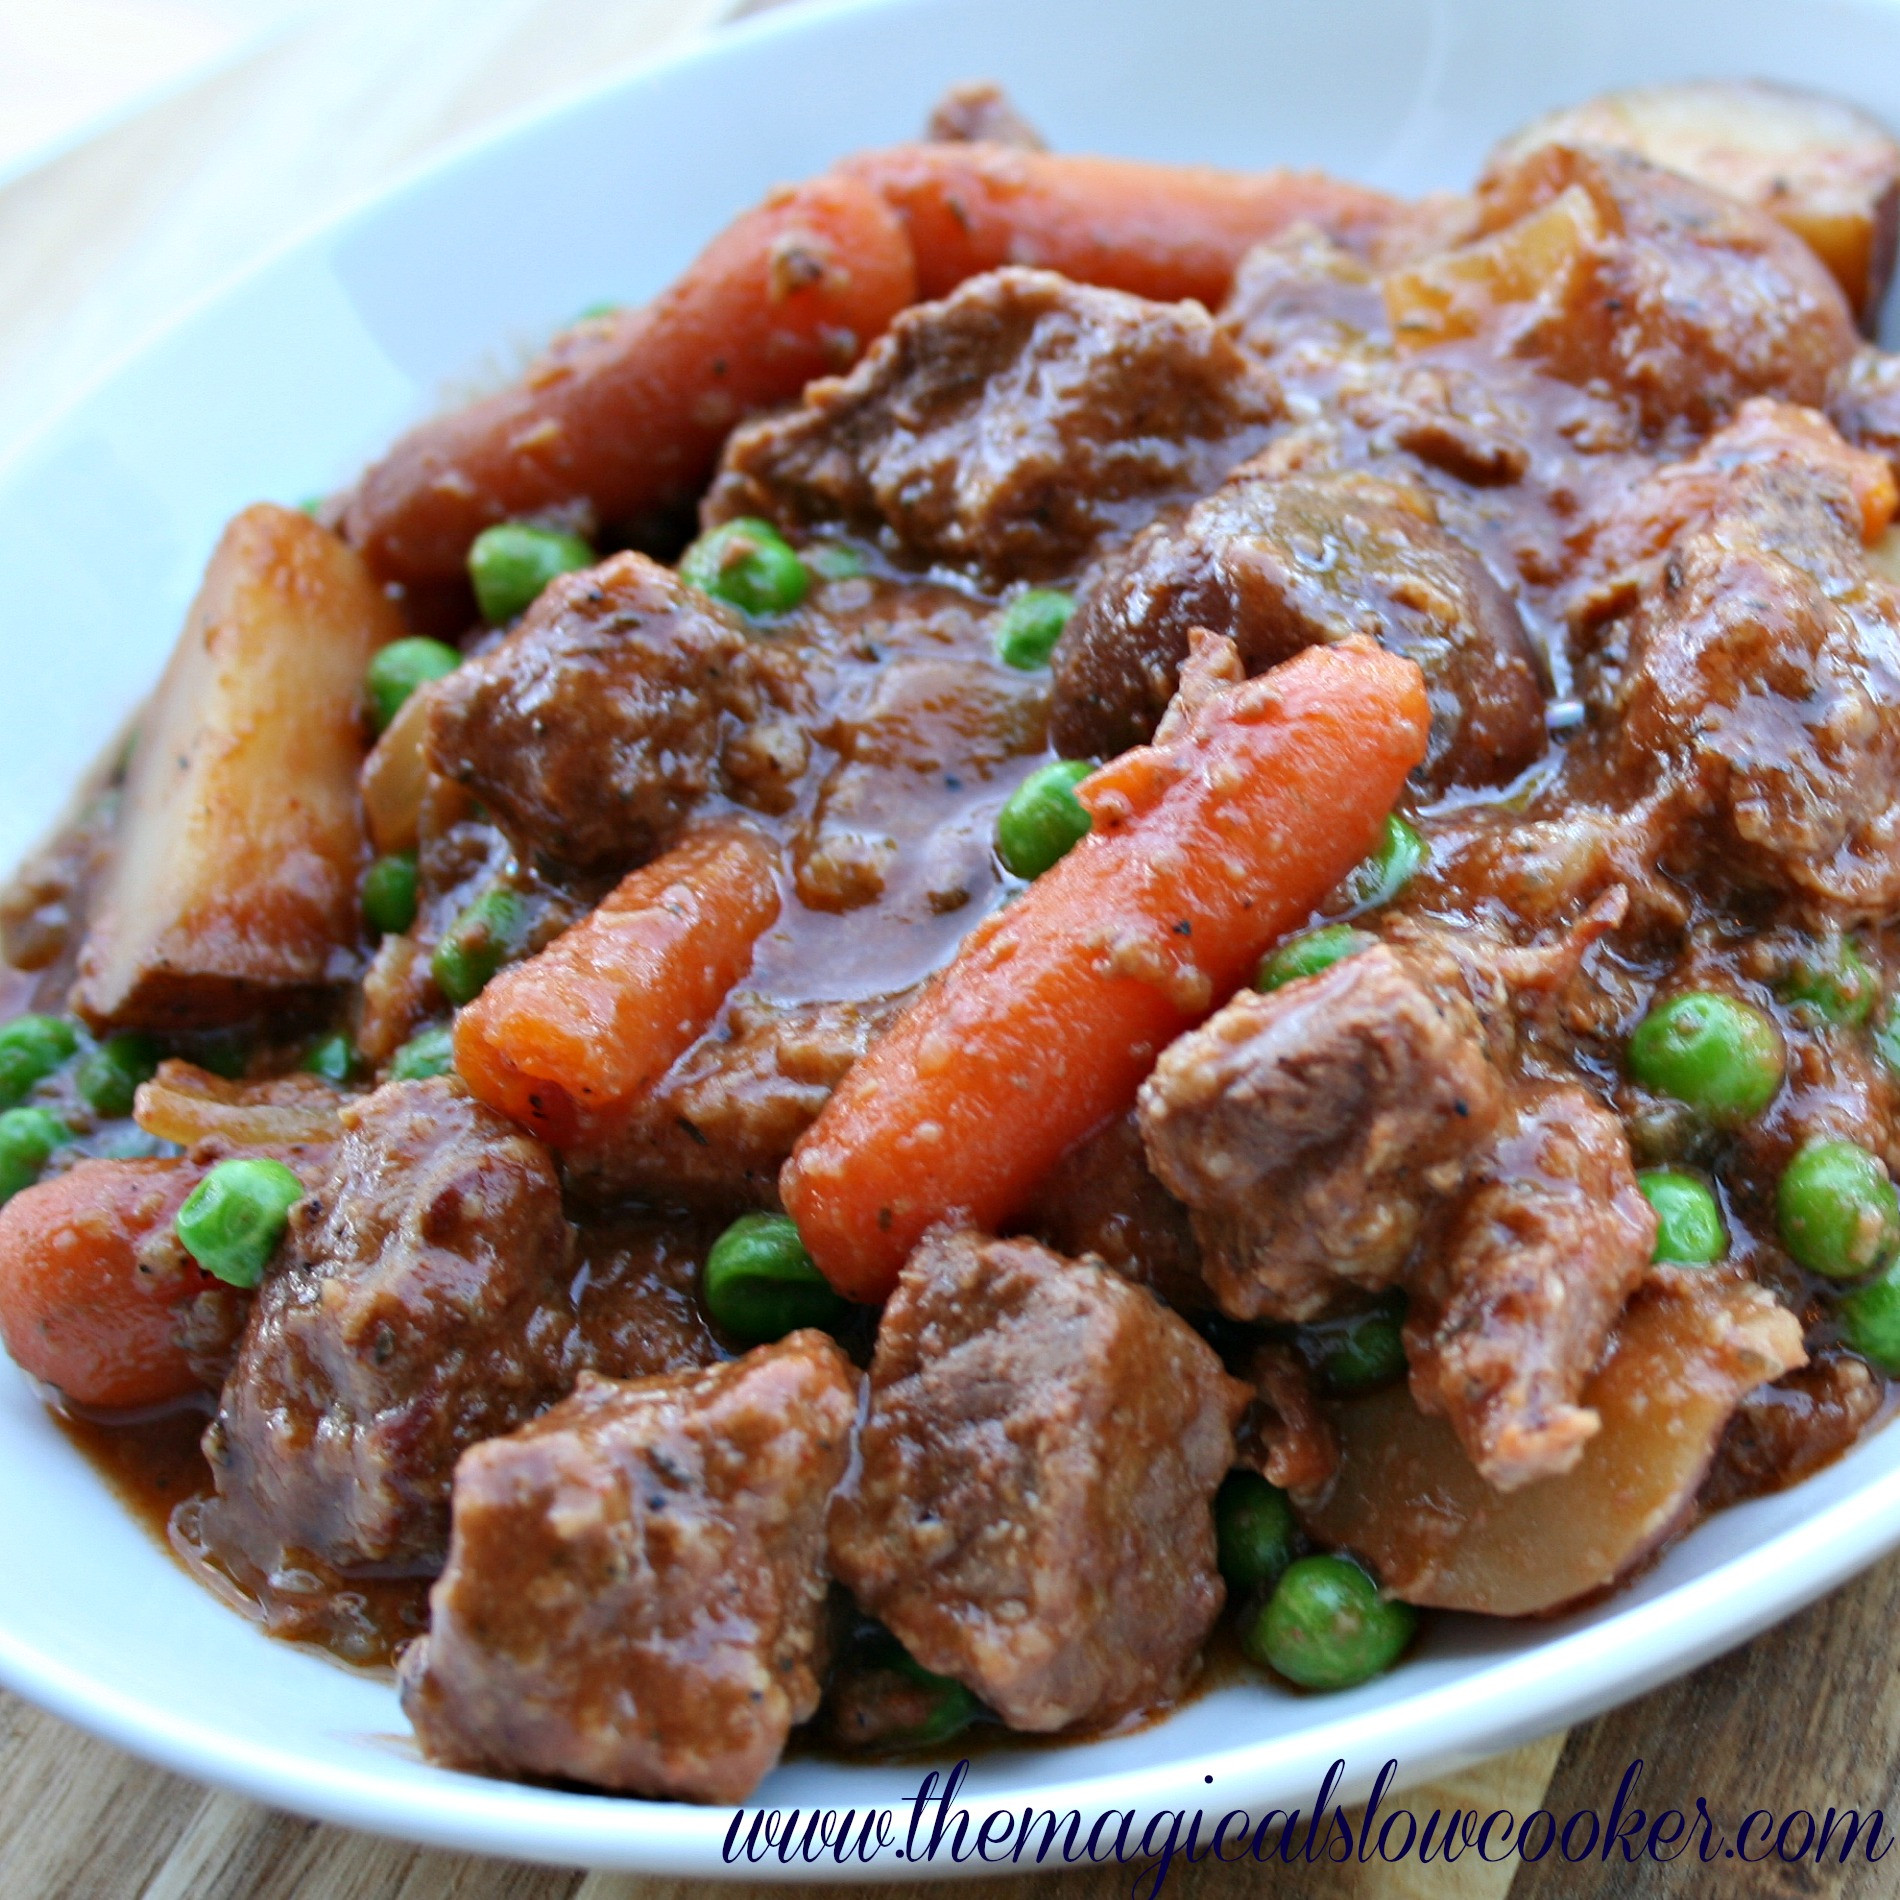 Beef Stew In Crockpot
 Slow Cooker Beef Stew The Magical Slow CookerThe Magical